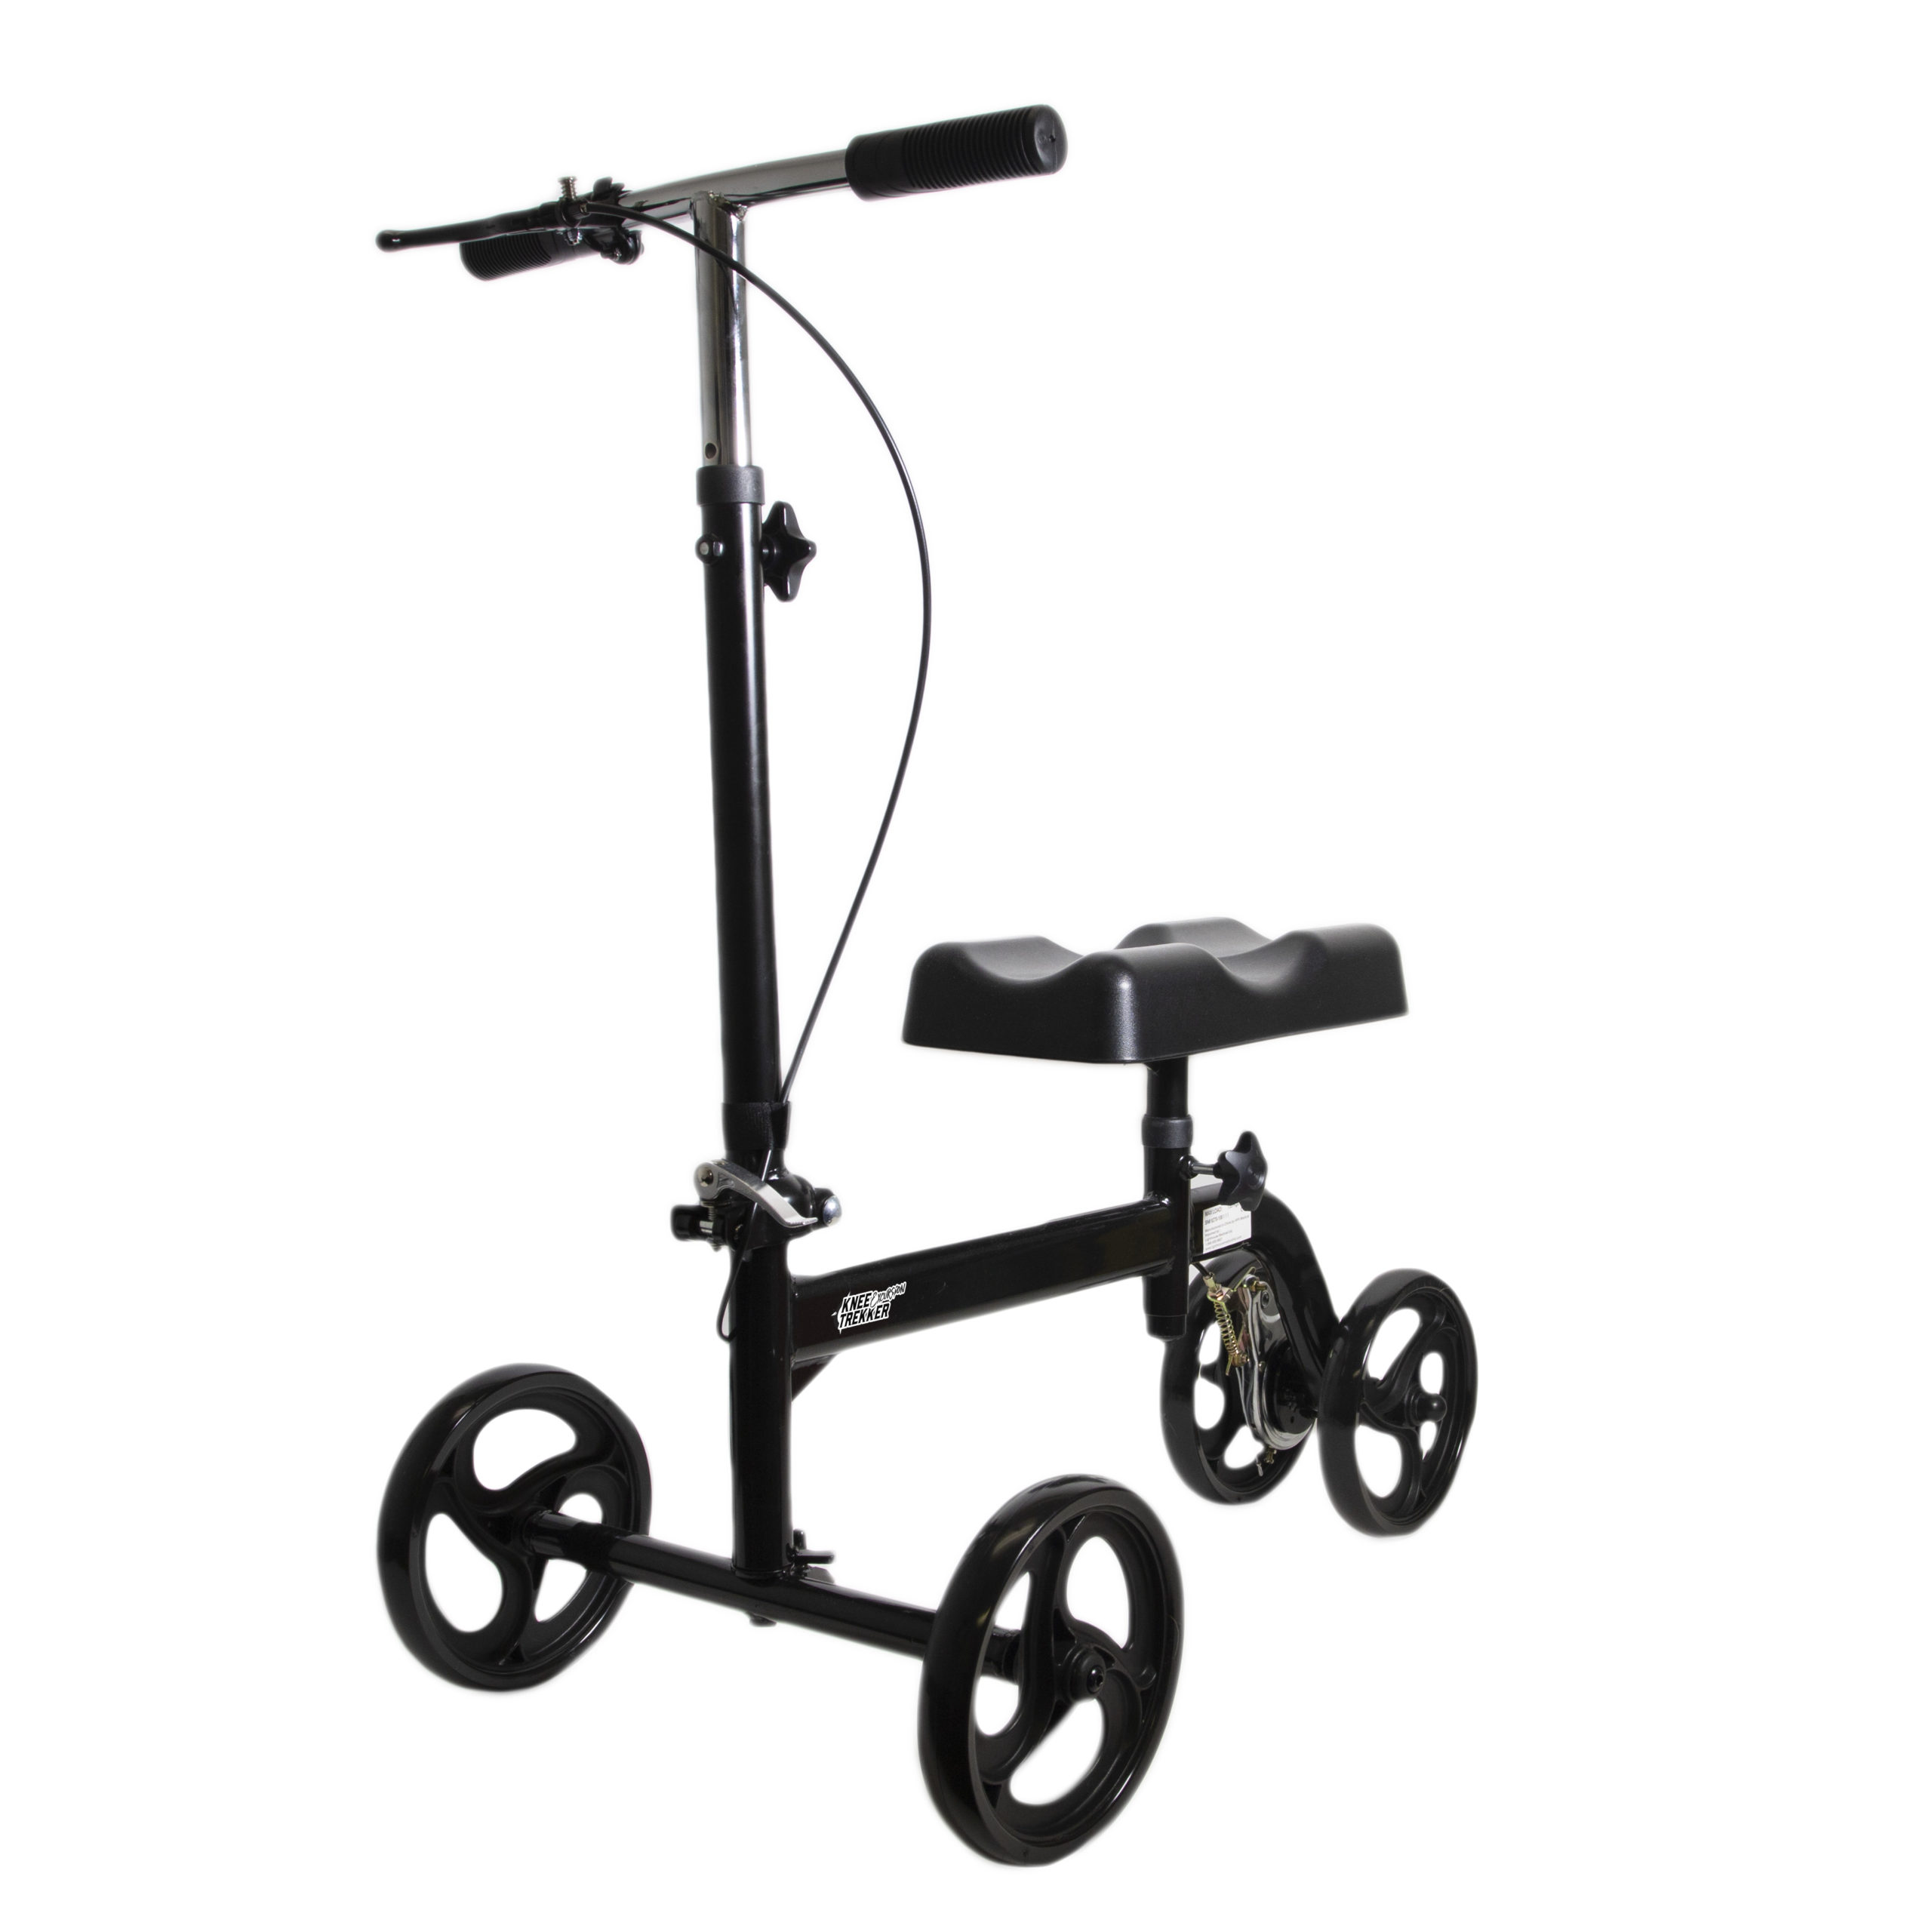 Excursion knee walker, angled view